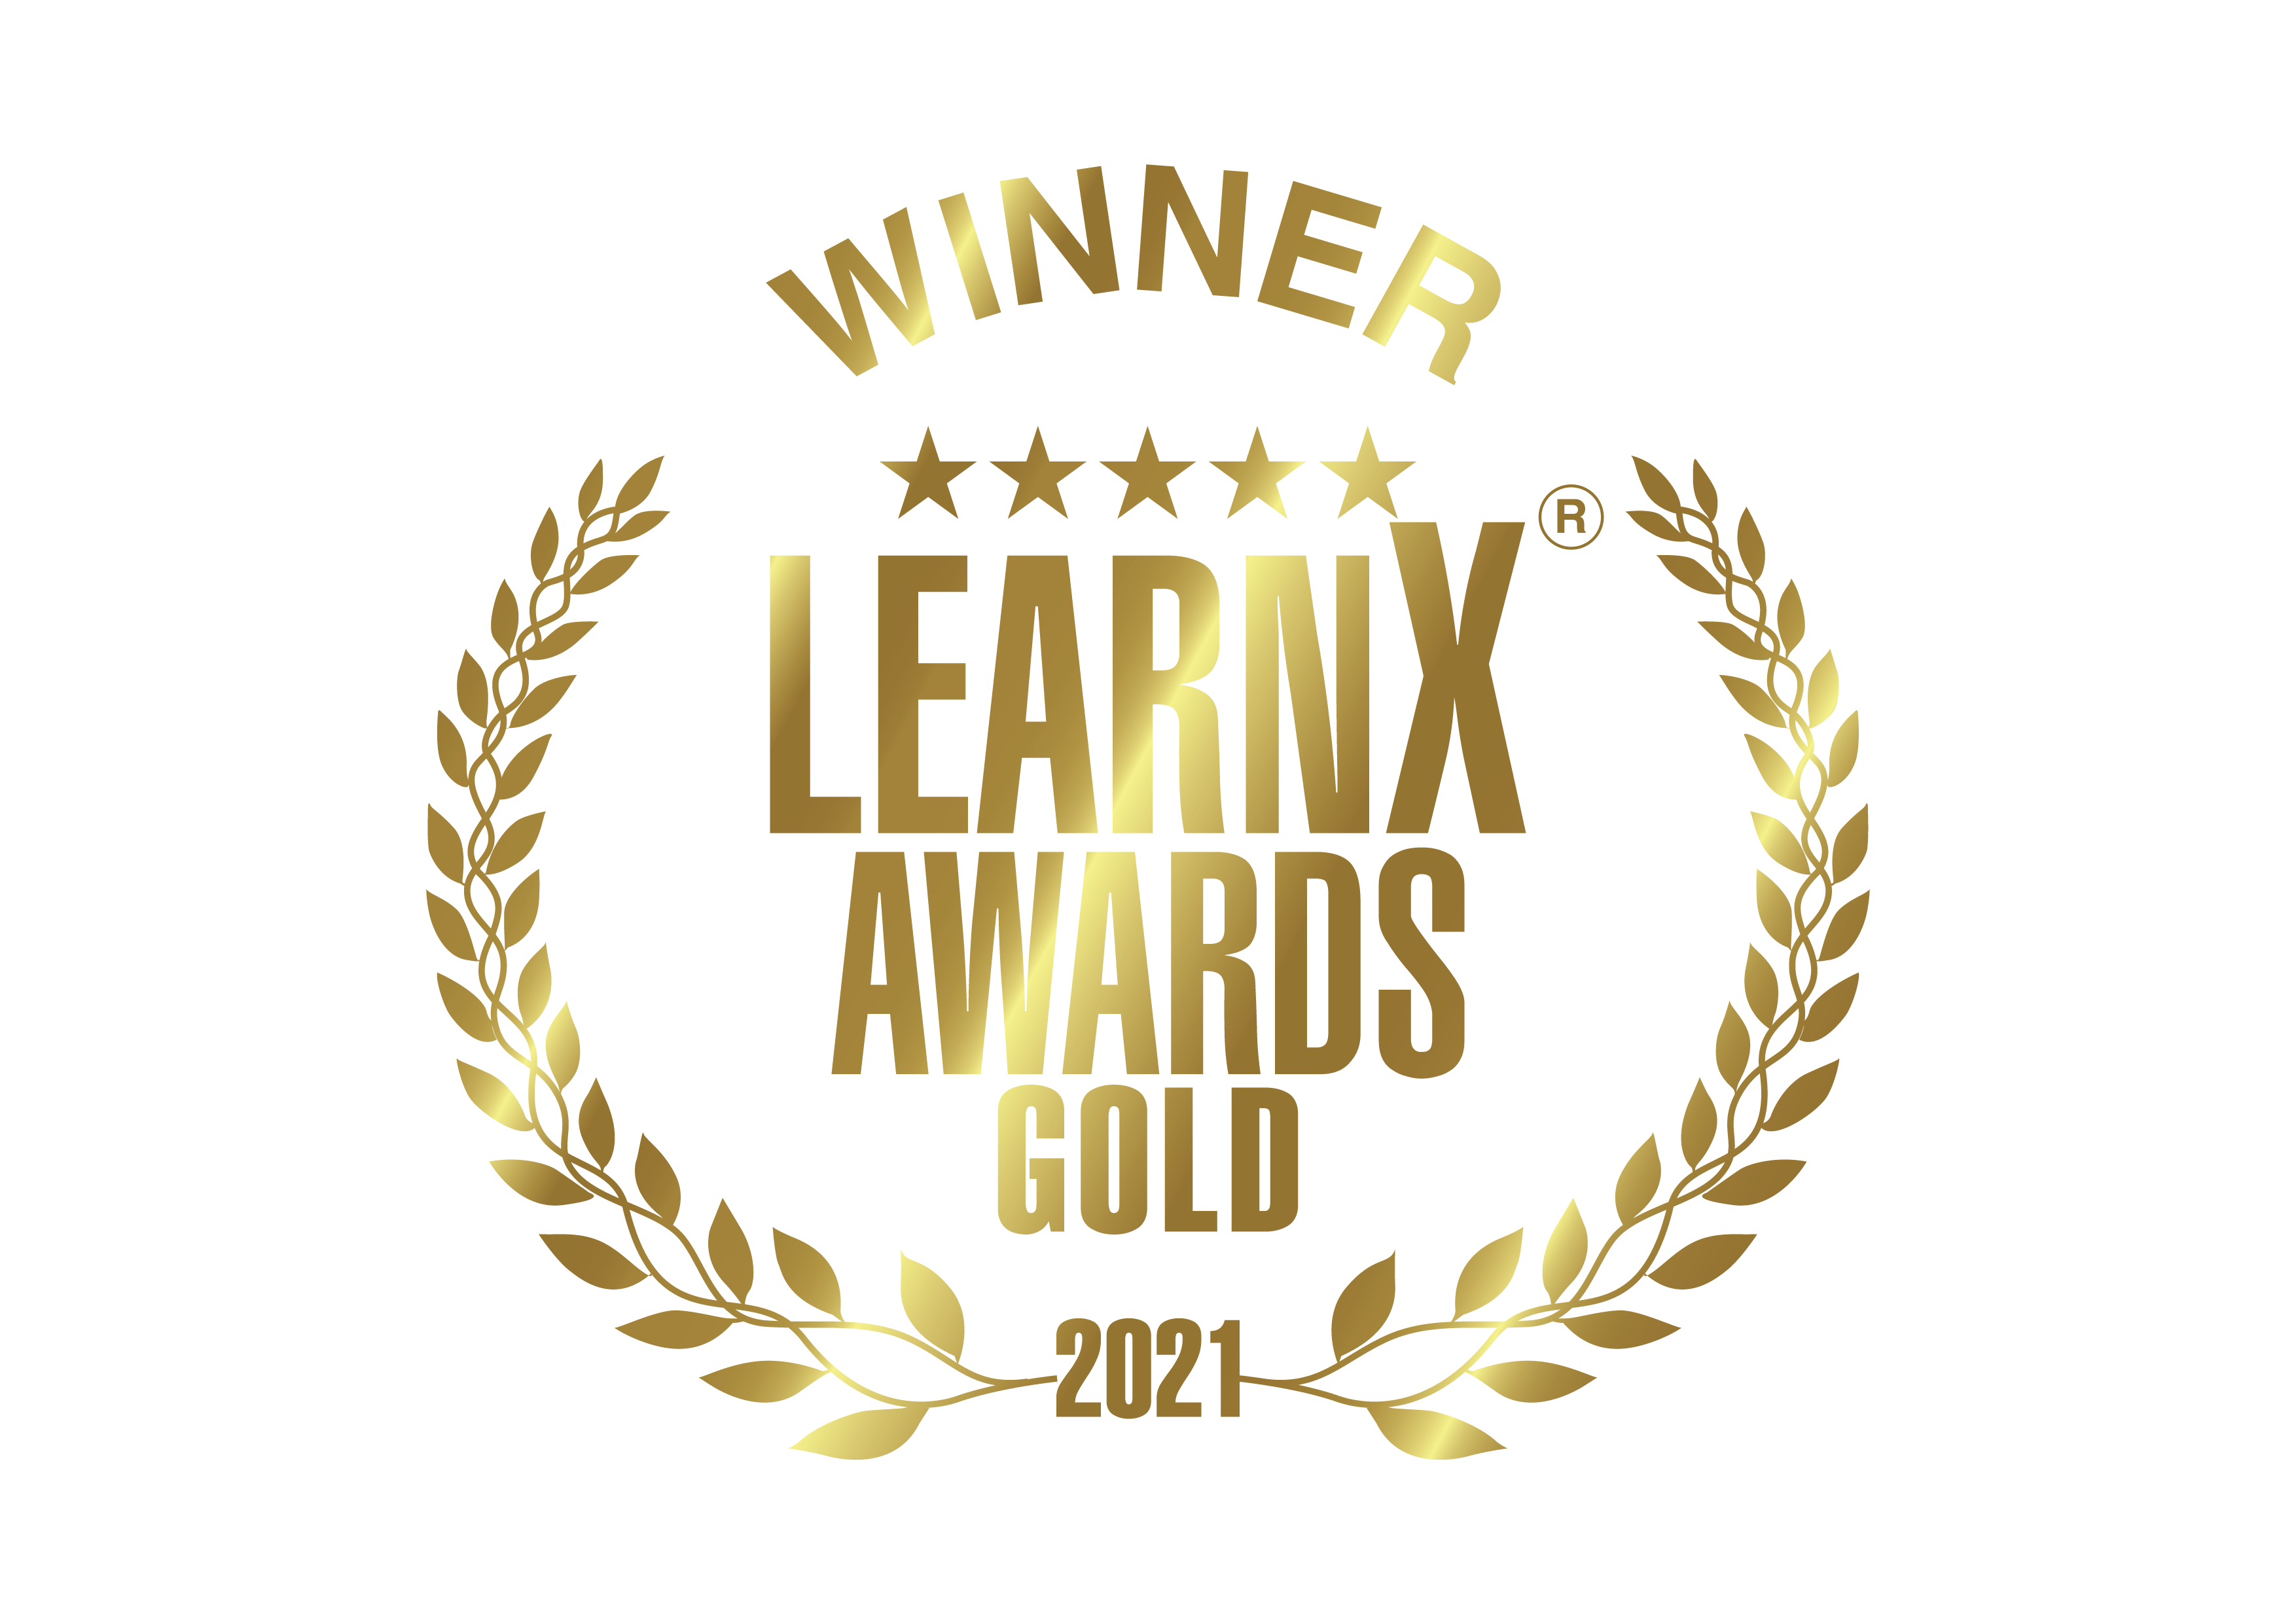 OpenLearning has been awarded a total of 8 awards at this year’s LearnX! Awards